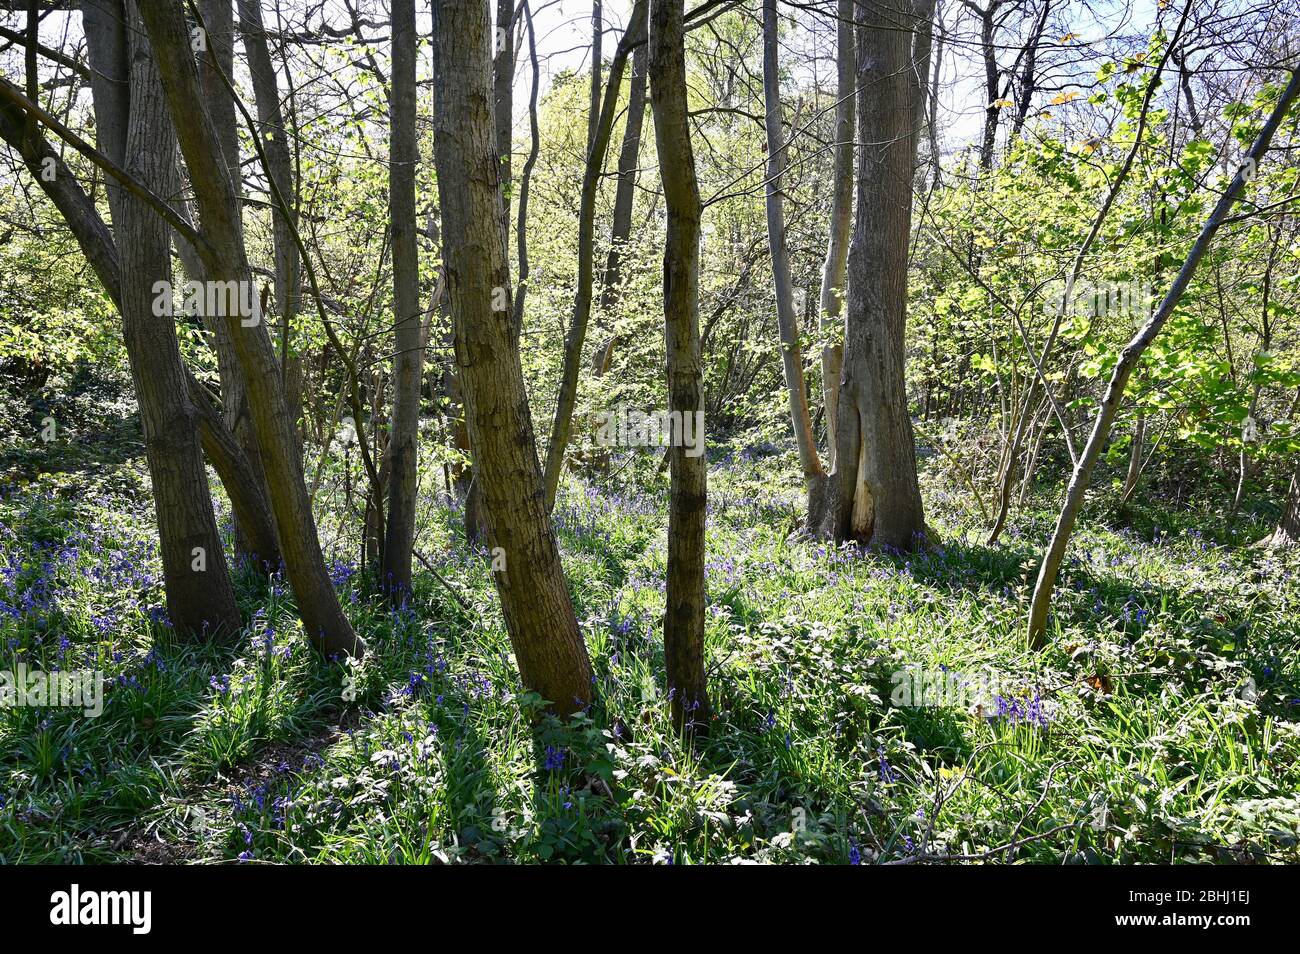 Bluebell Woods. Racines Cray Meadows, Sidcup, Kent. ROYAUME-UNI Banque D'Images